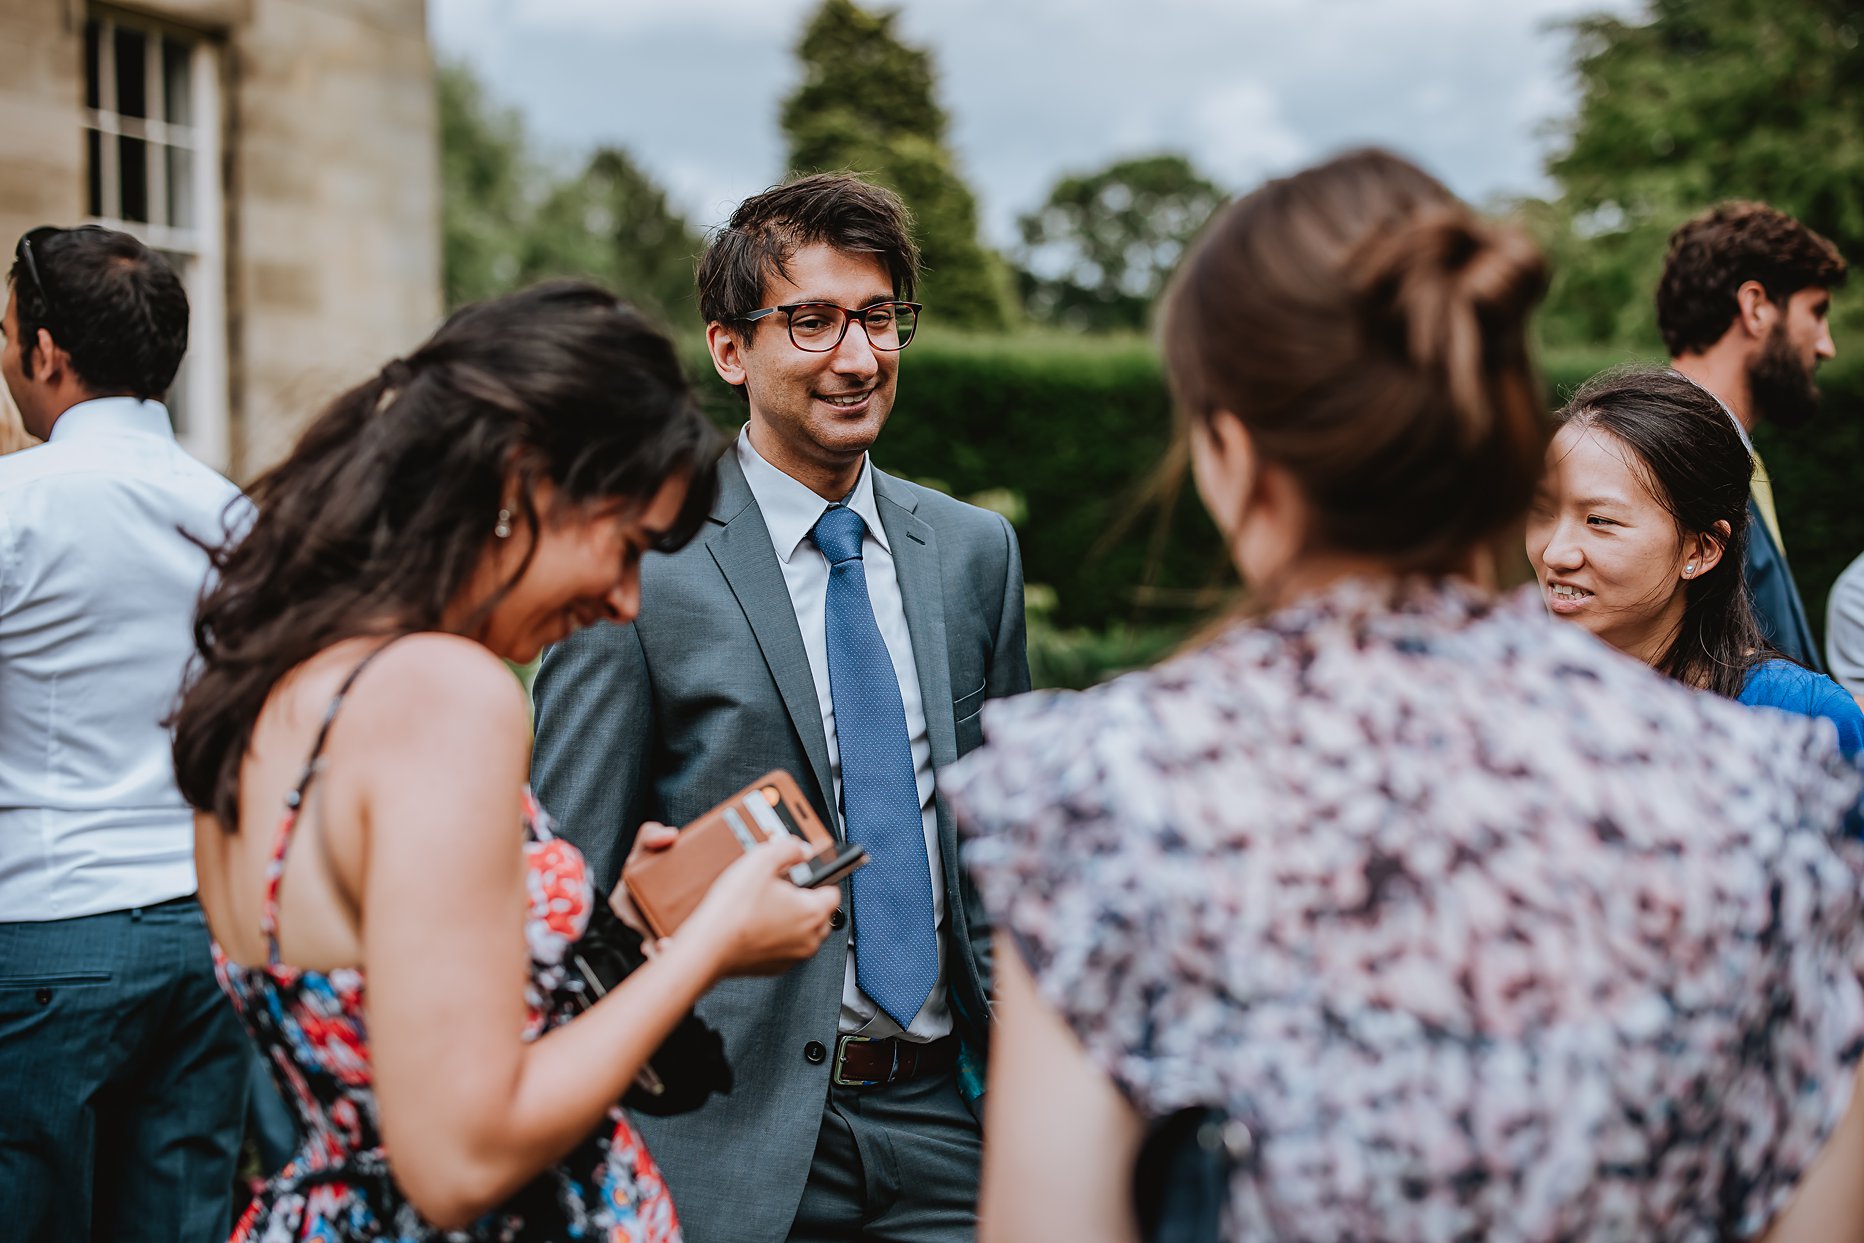 Wedding guests chatting during the drinks reception at Saltmarshe Hall.